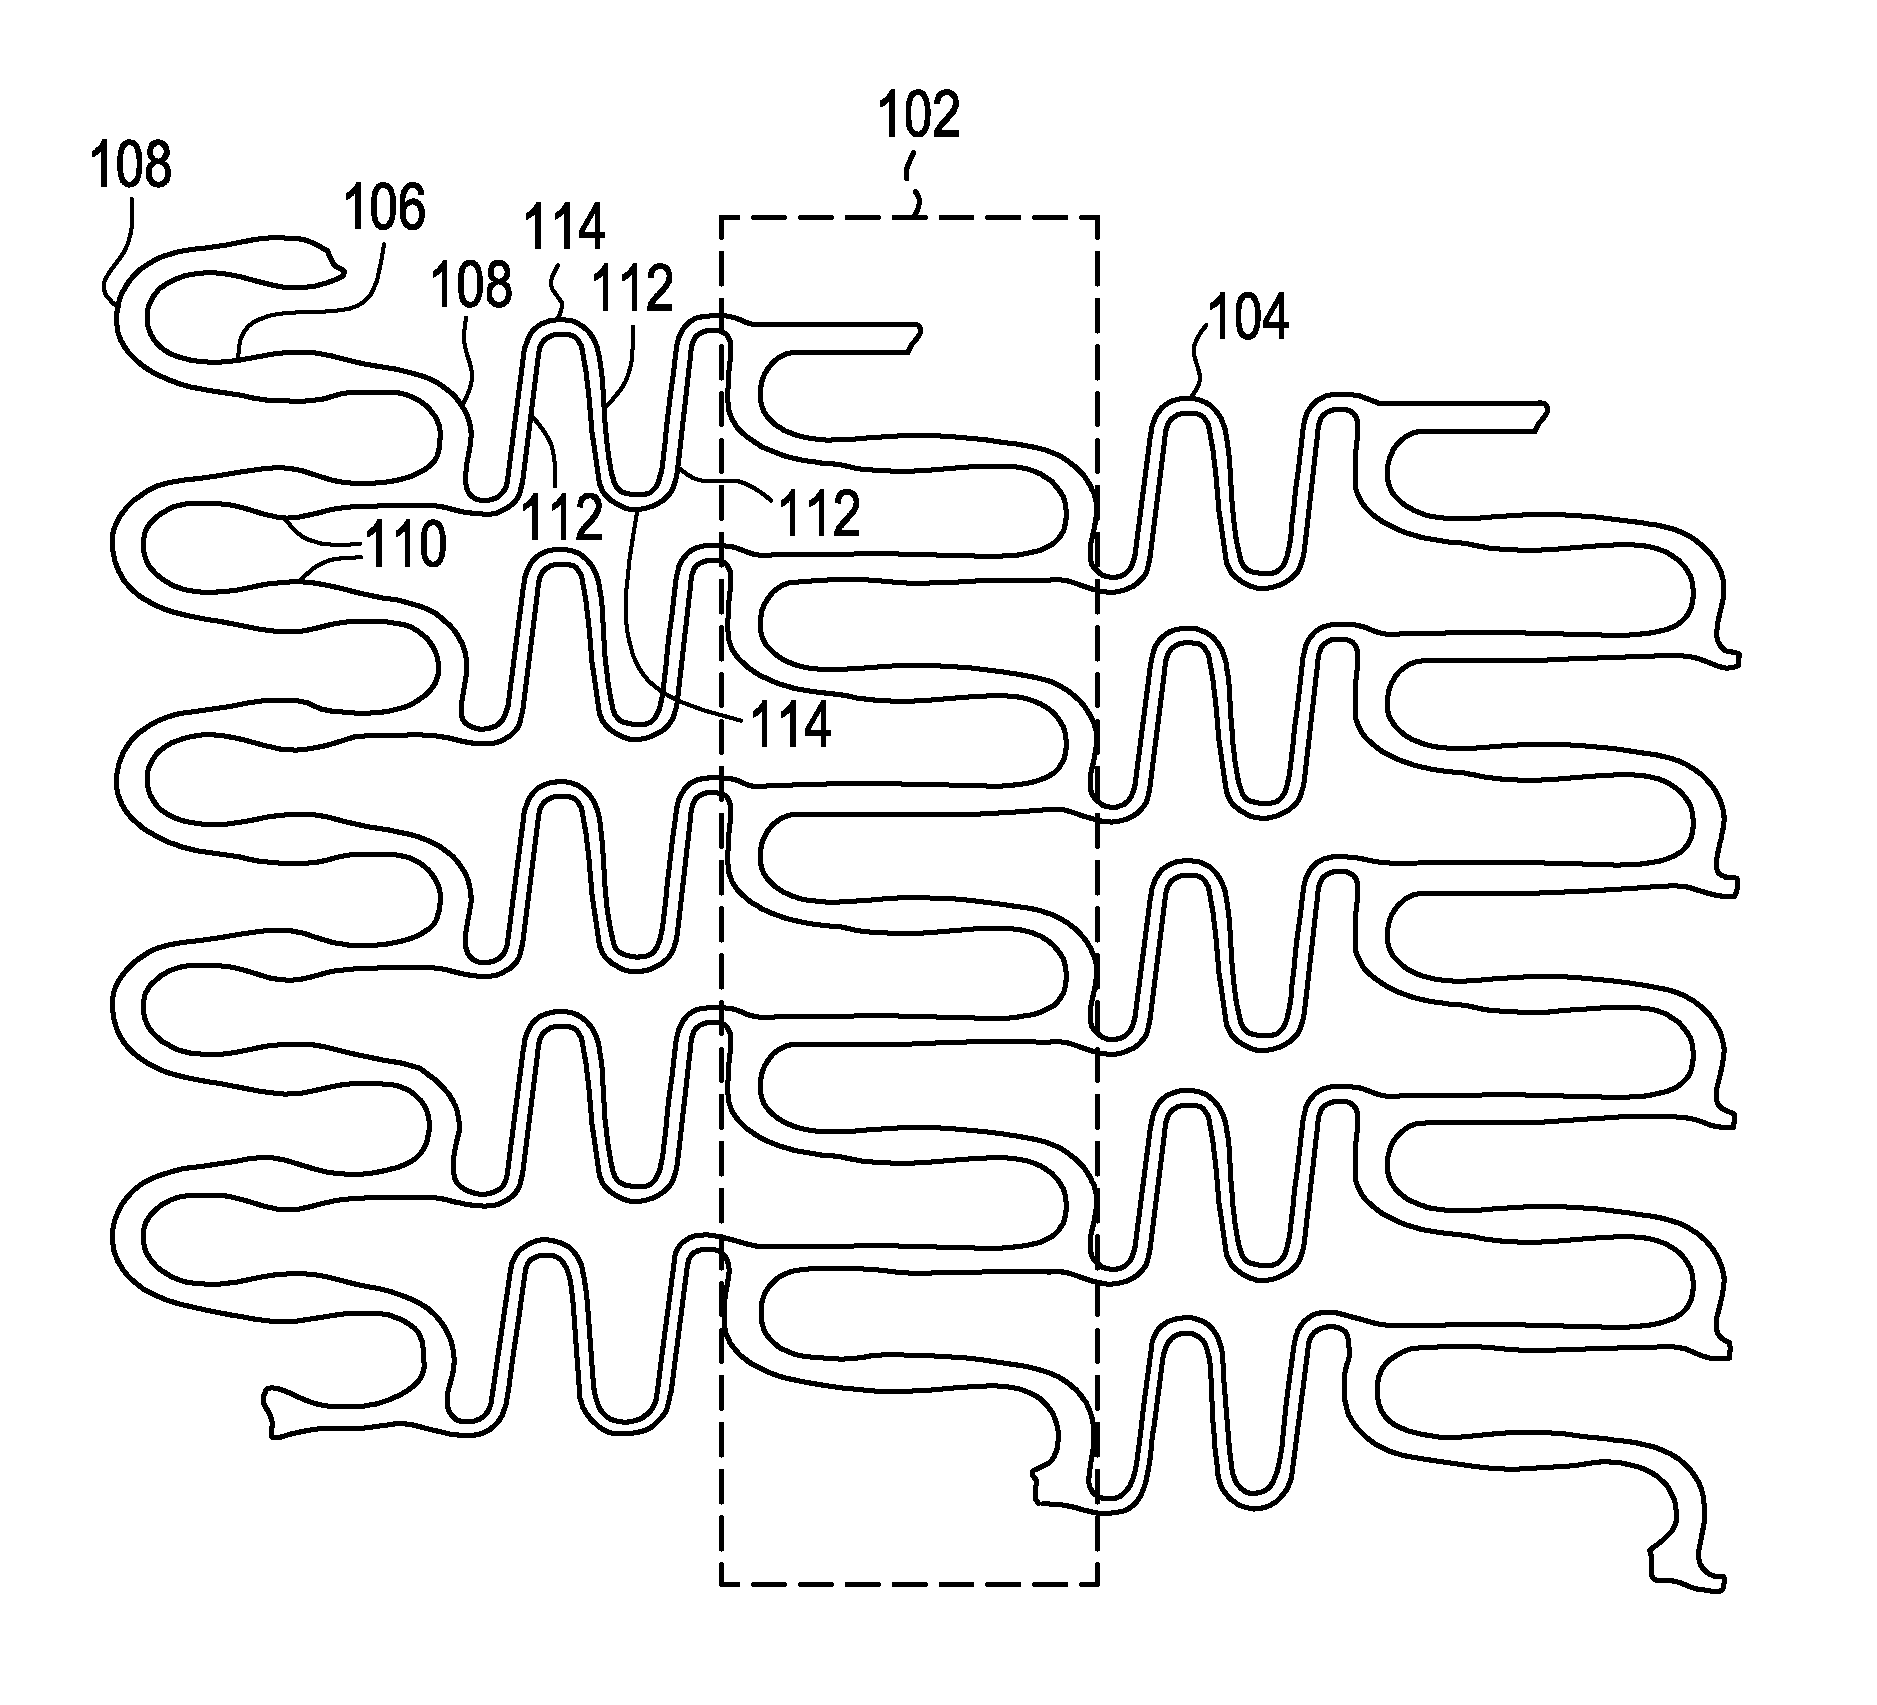 Balloon expandable bioabsorbable drug eluting stent